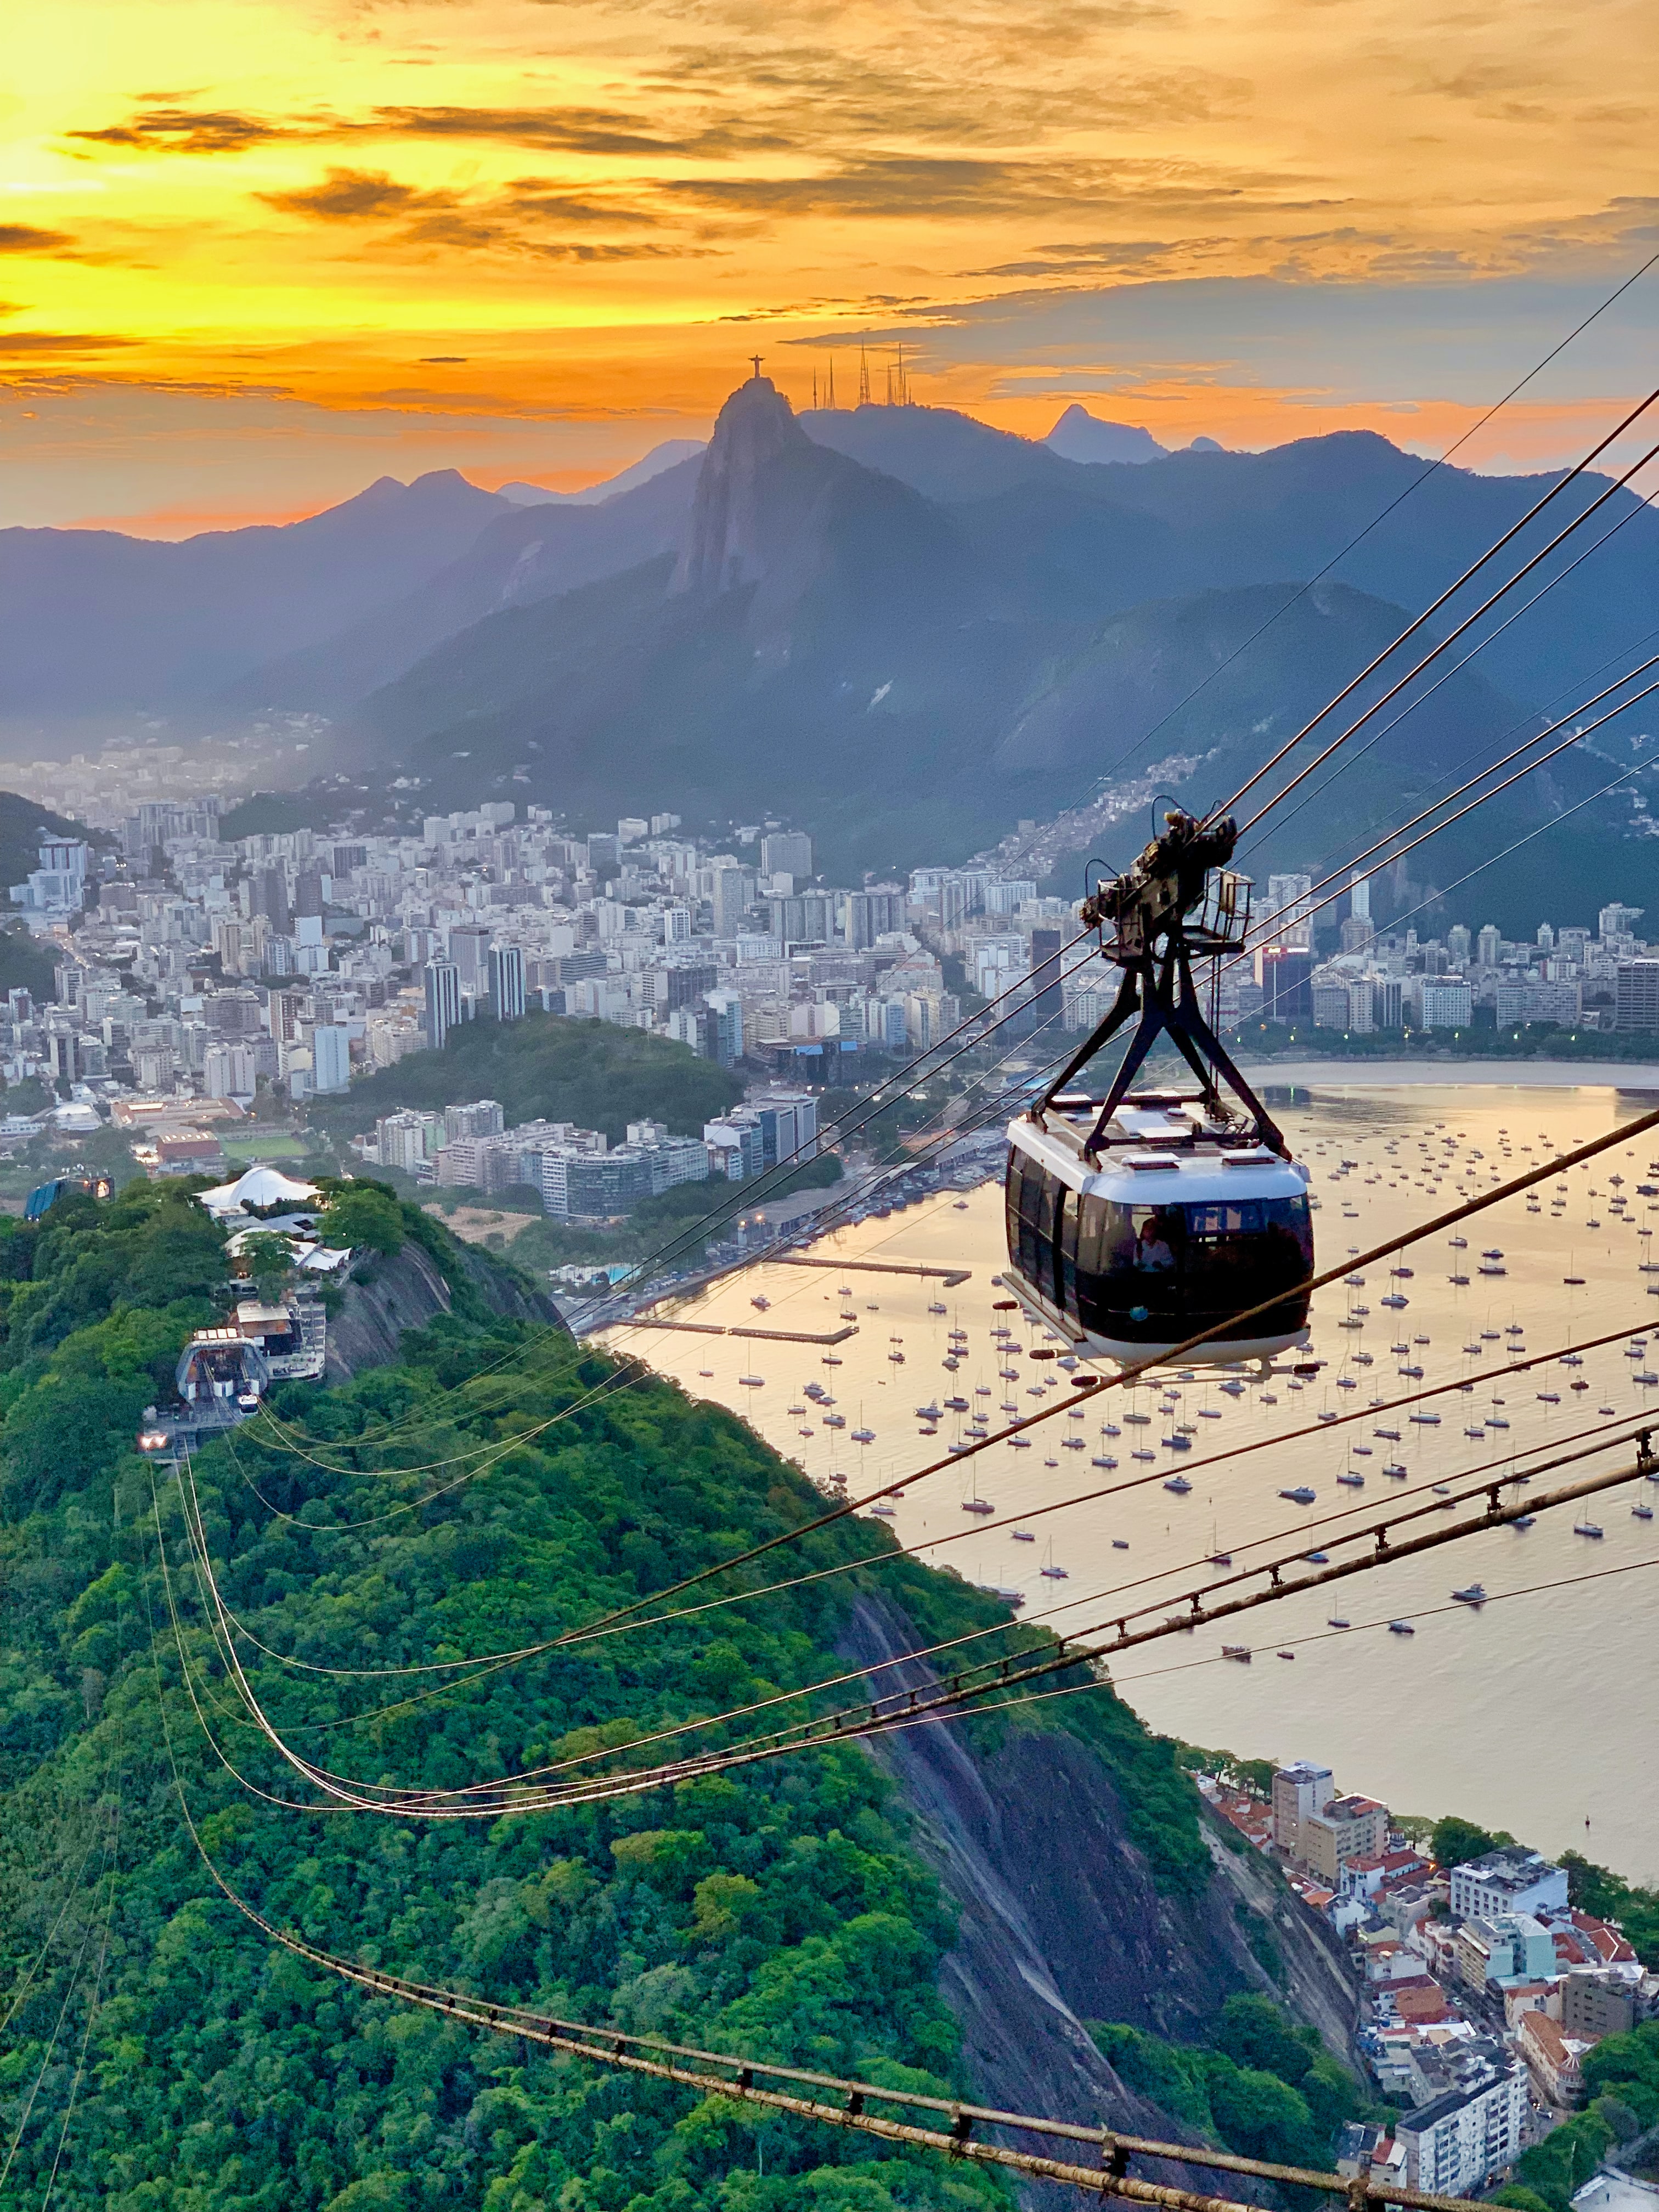 A glass-walled cable car descends Rio's Sugarloaf Mountain at sunset, travelling towards a rocky, forested hill. The city of Rio is visible in the background, surrounded by mountains.